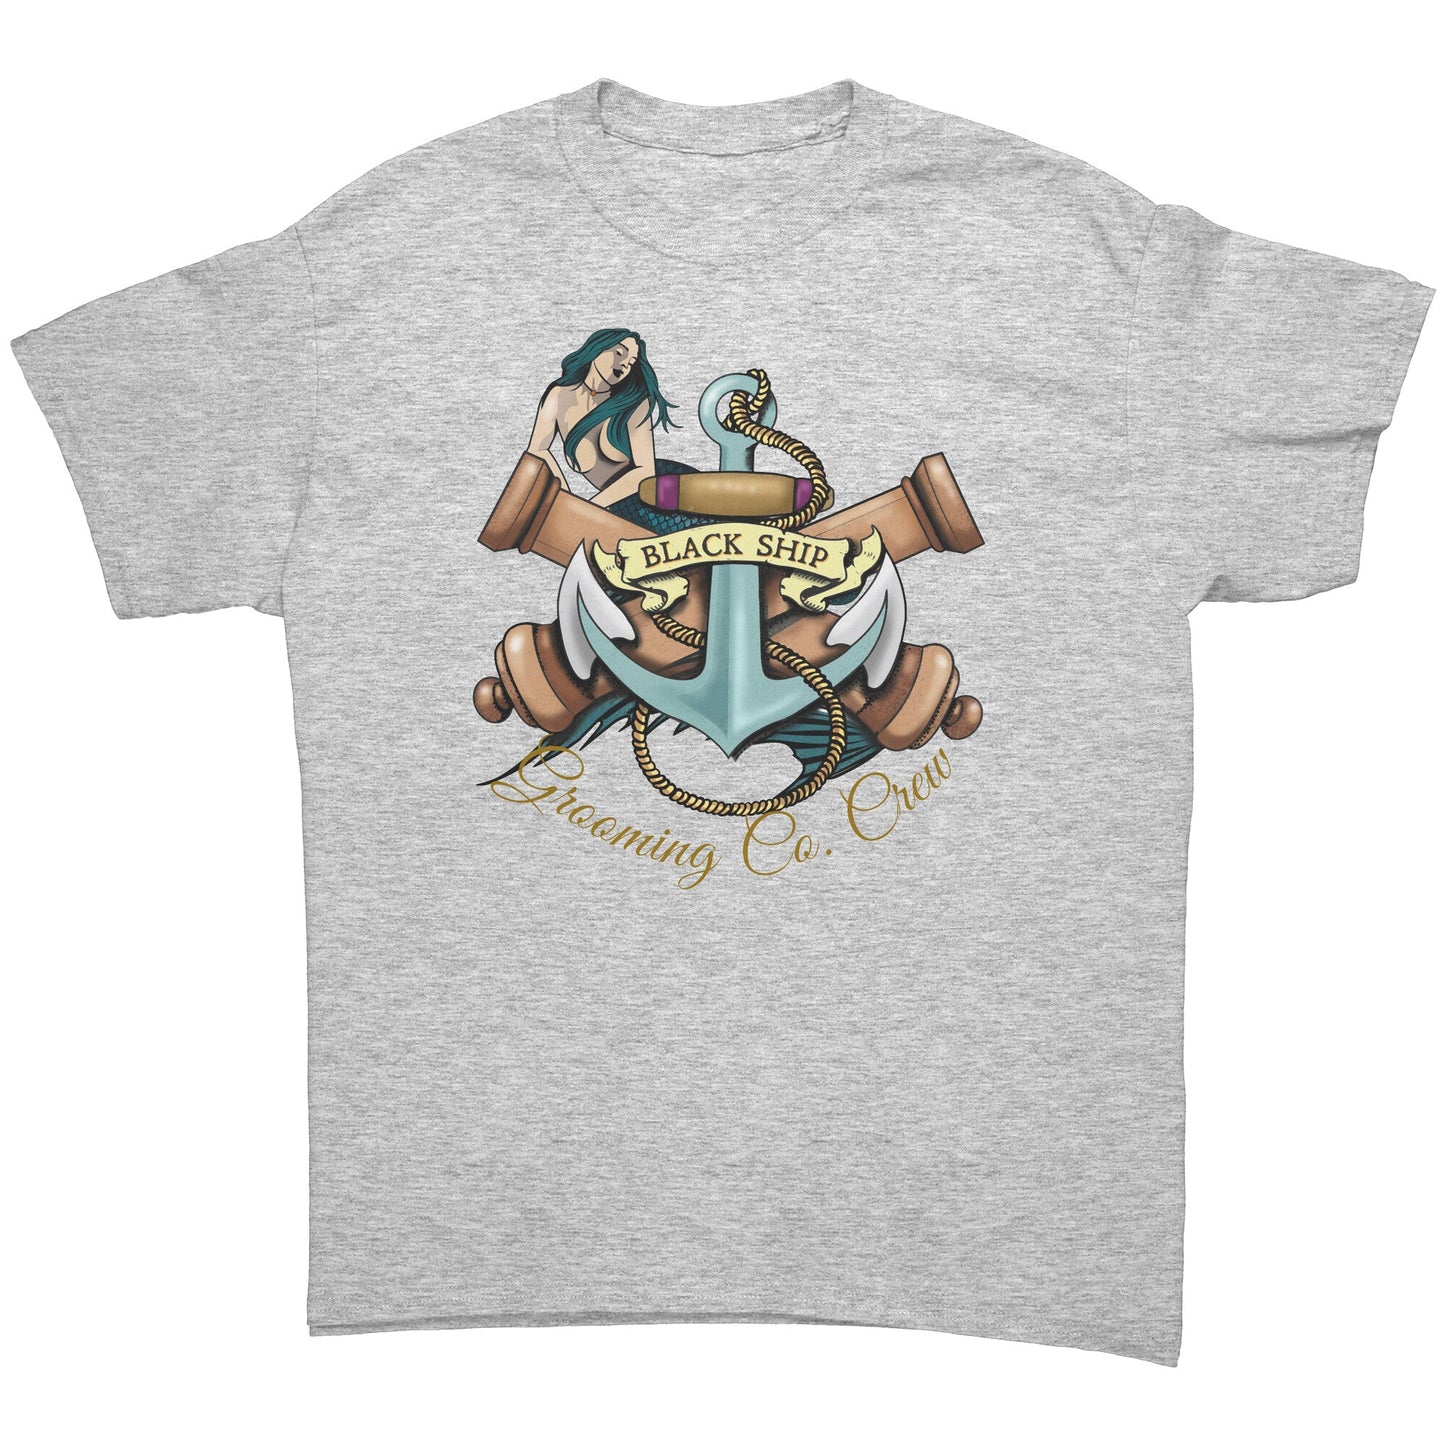 Classic Fit Black Ship Grooming Crew T-Shirt - Black Ship Grooming Co.